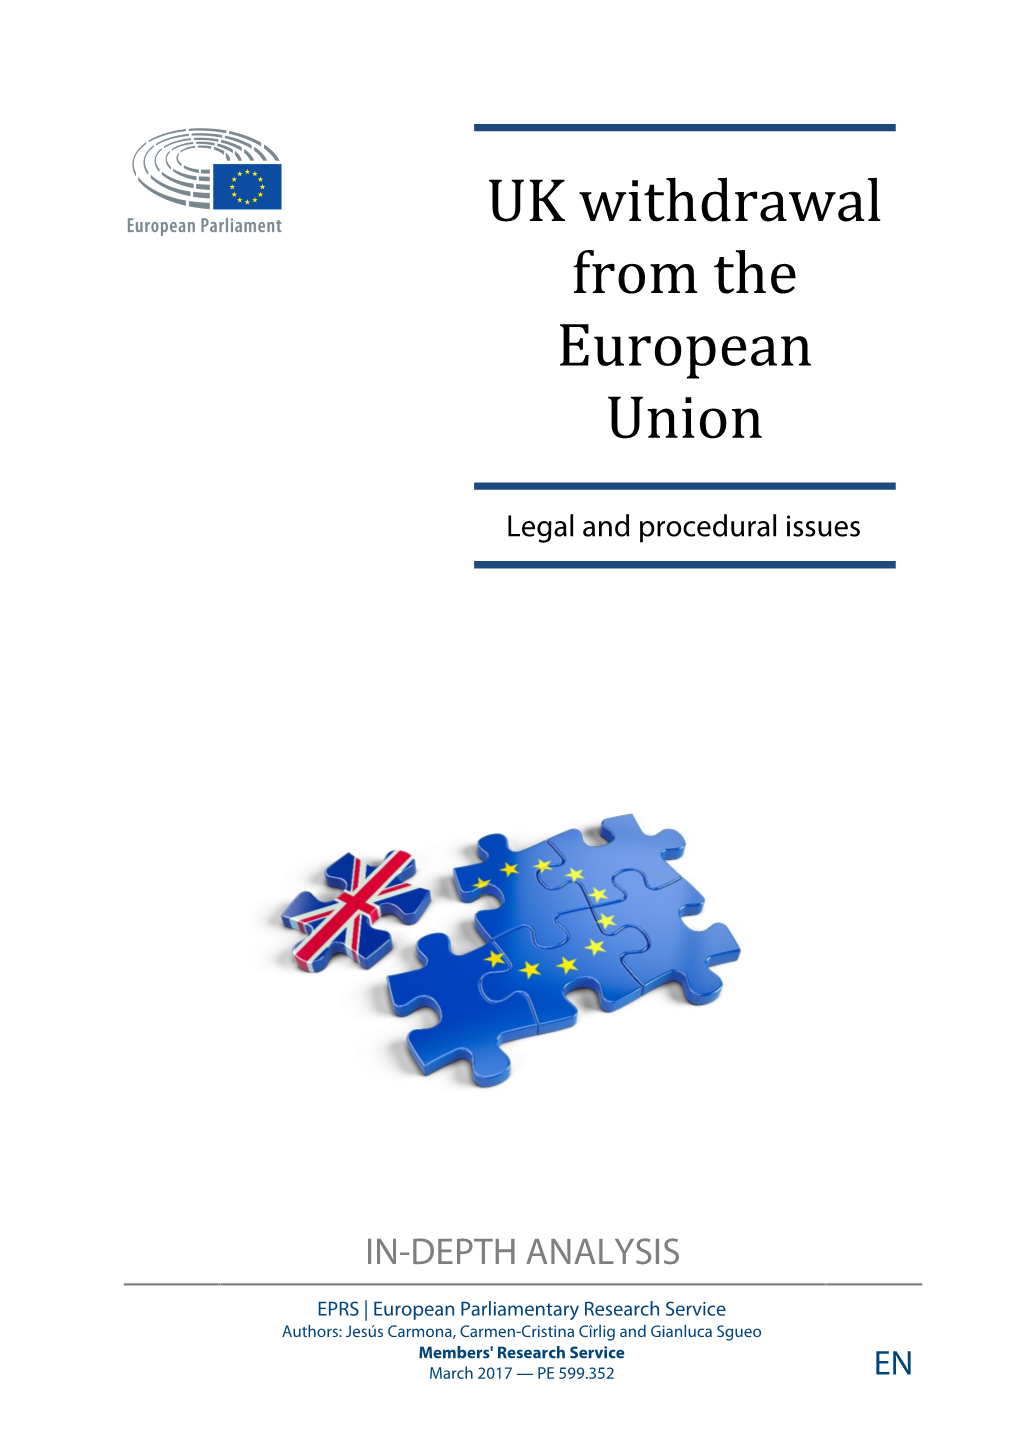 UK Withdrawal from the European Union: Legal and Procedural Issues